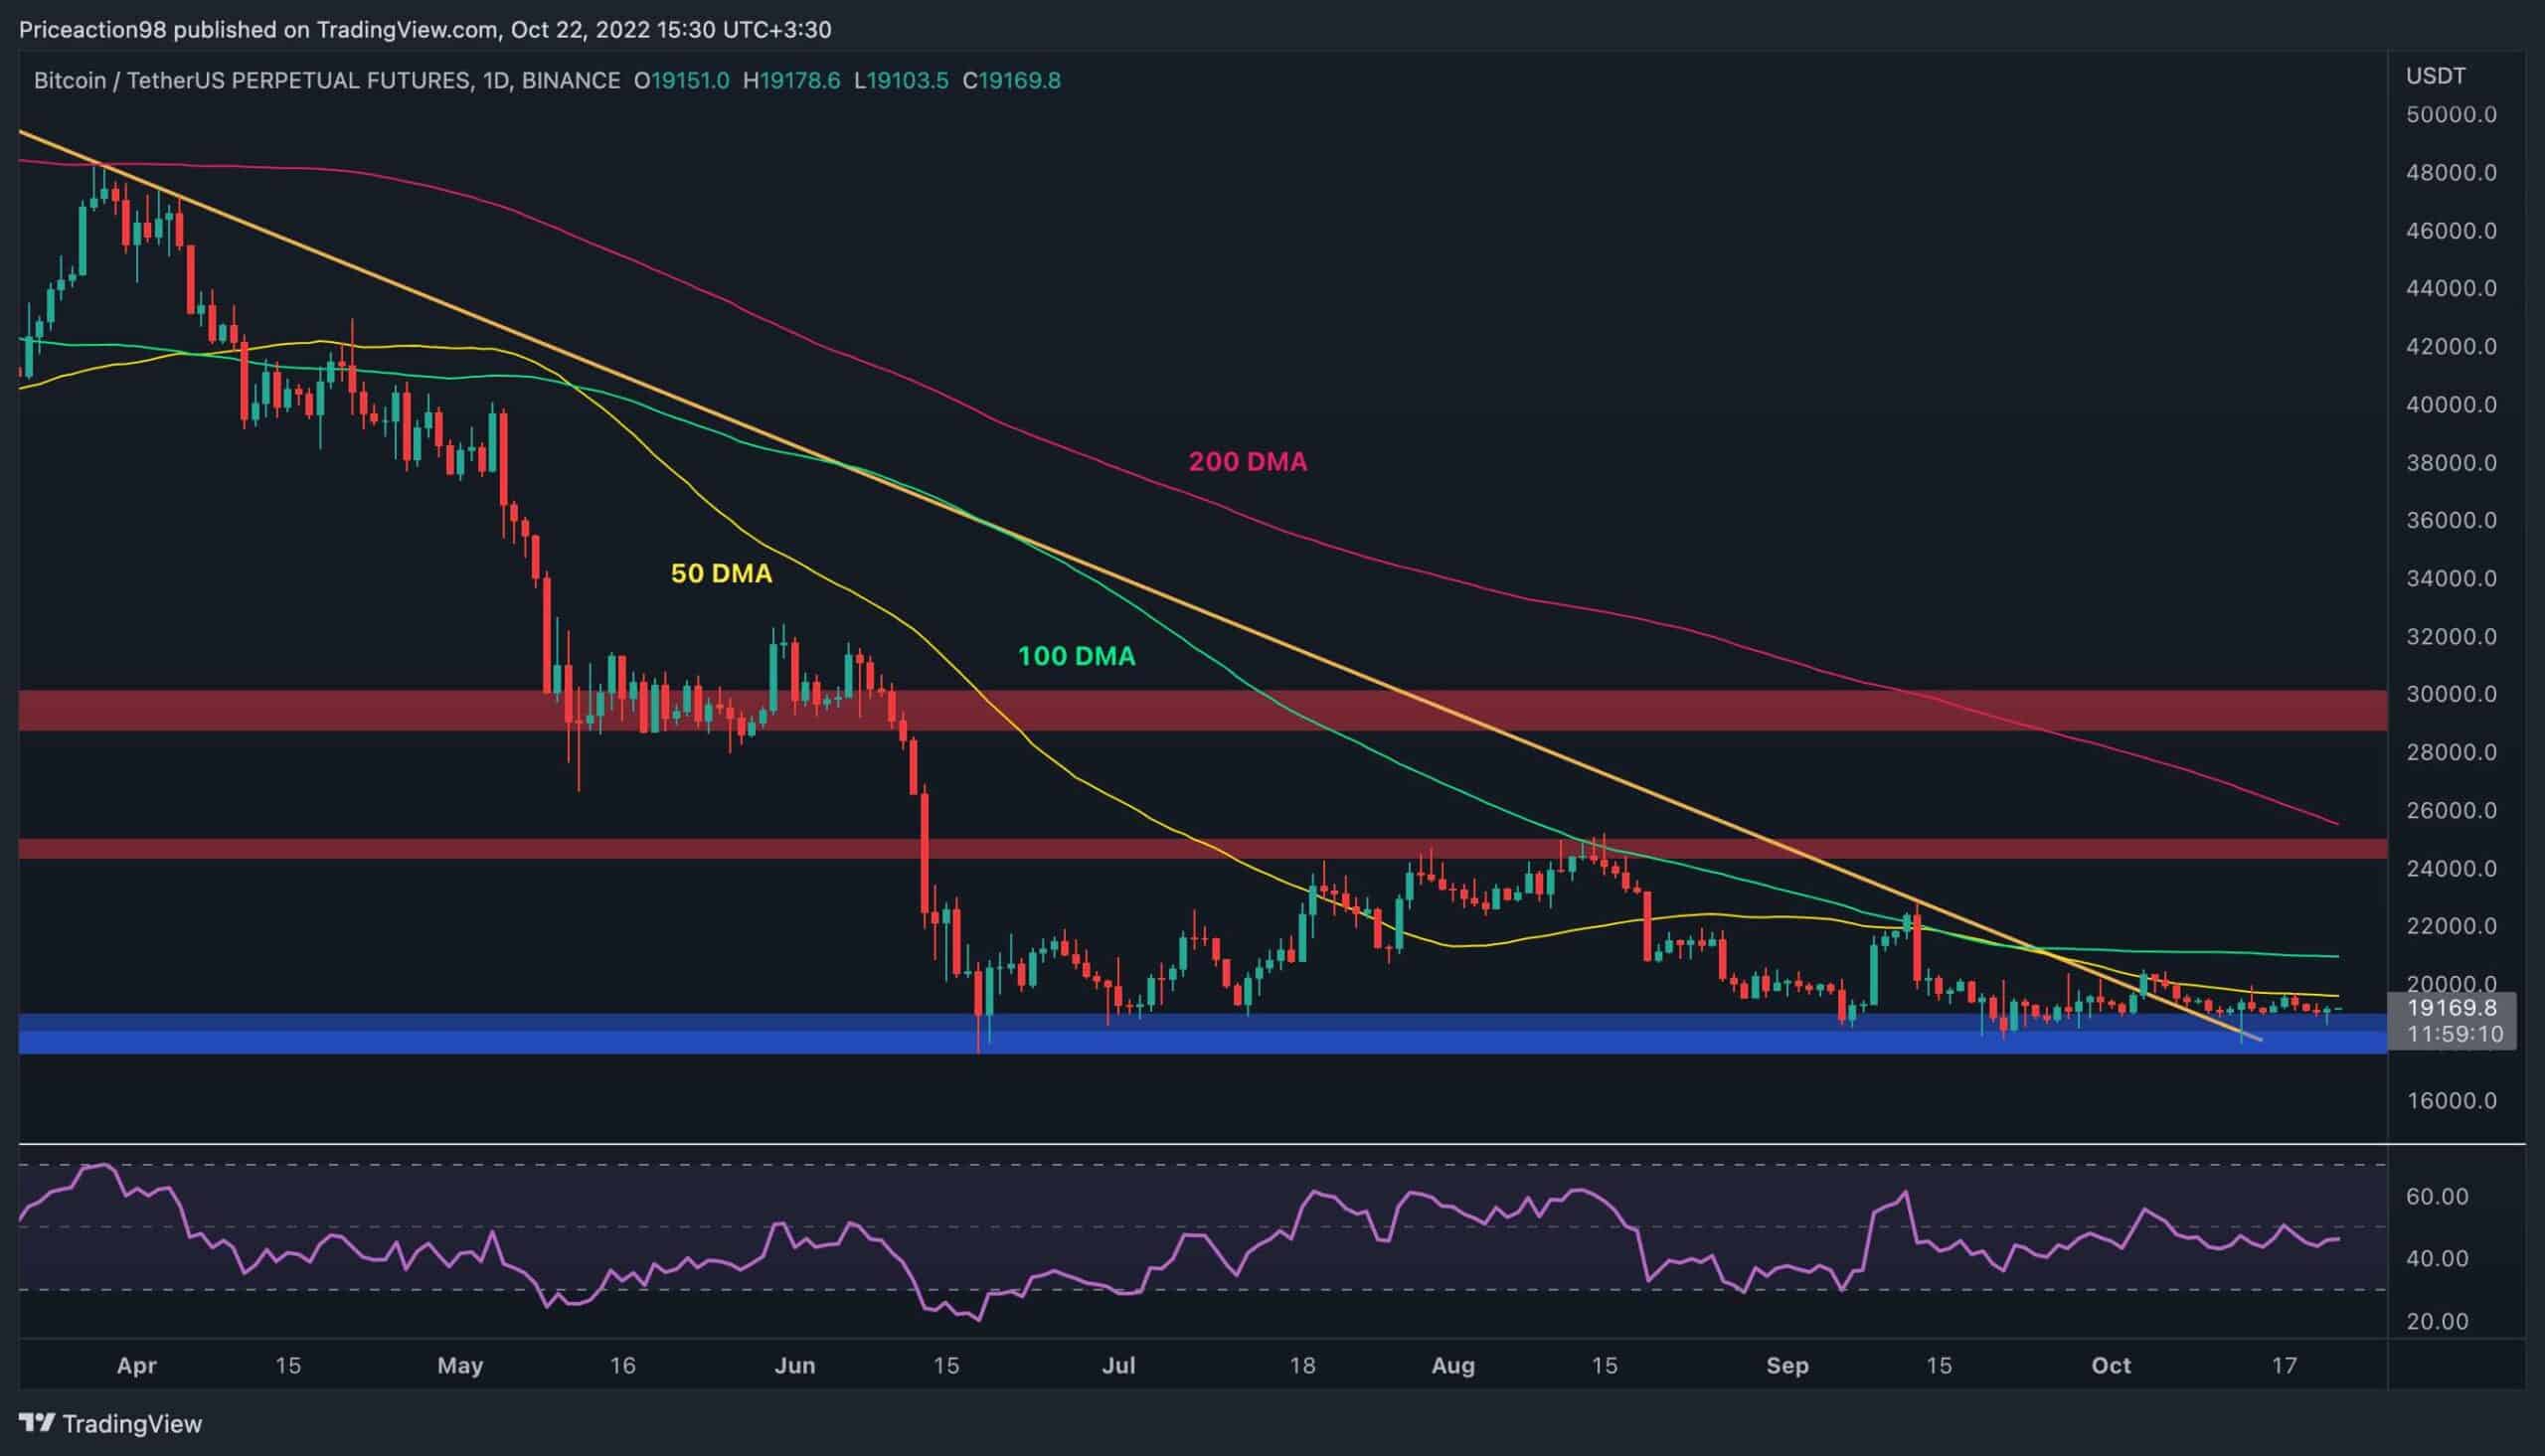 The-calm-before-the-storm?-btc’s-consolidation-likely-to-end-soon-(bitcoin-price-analysis)